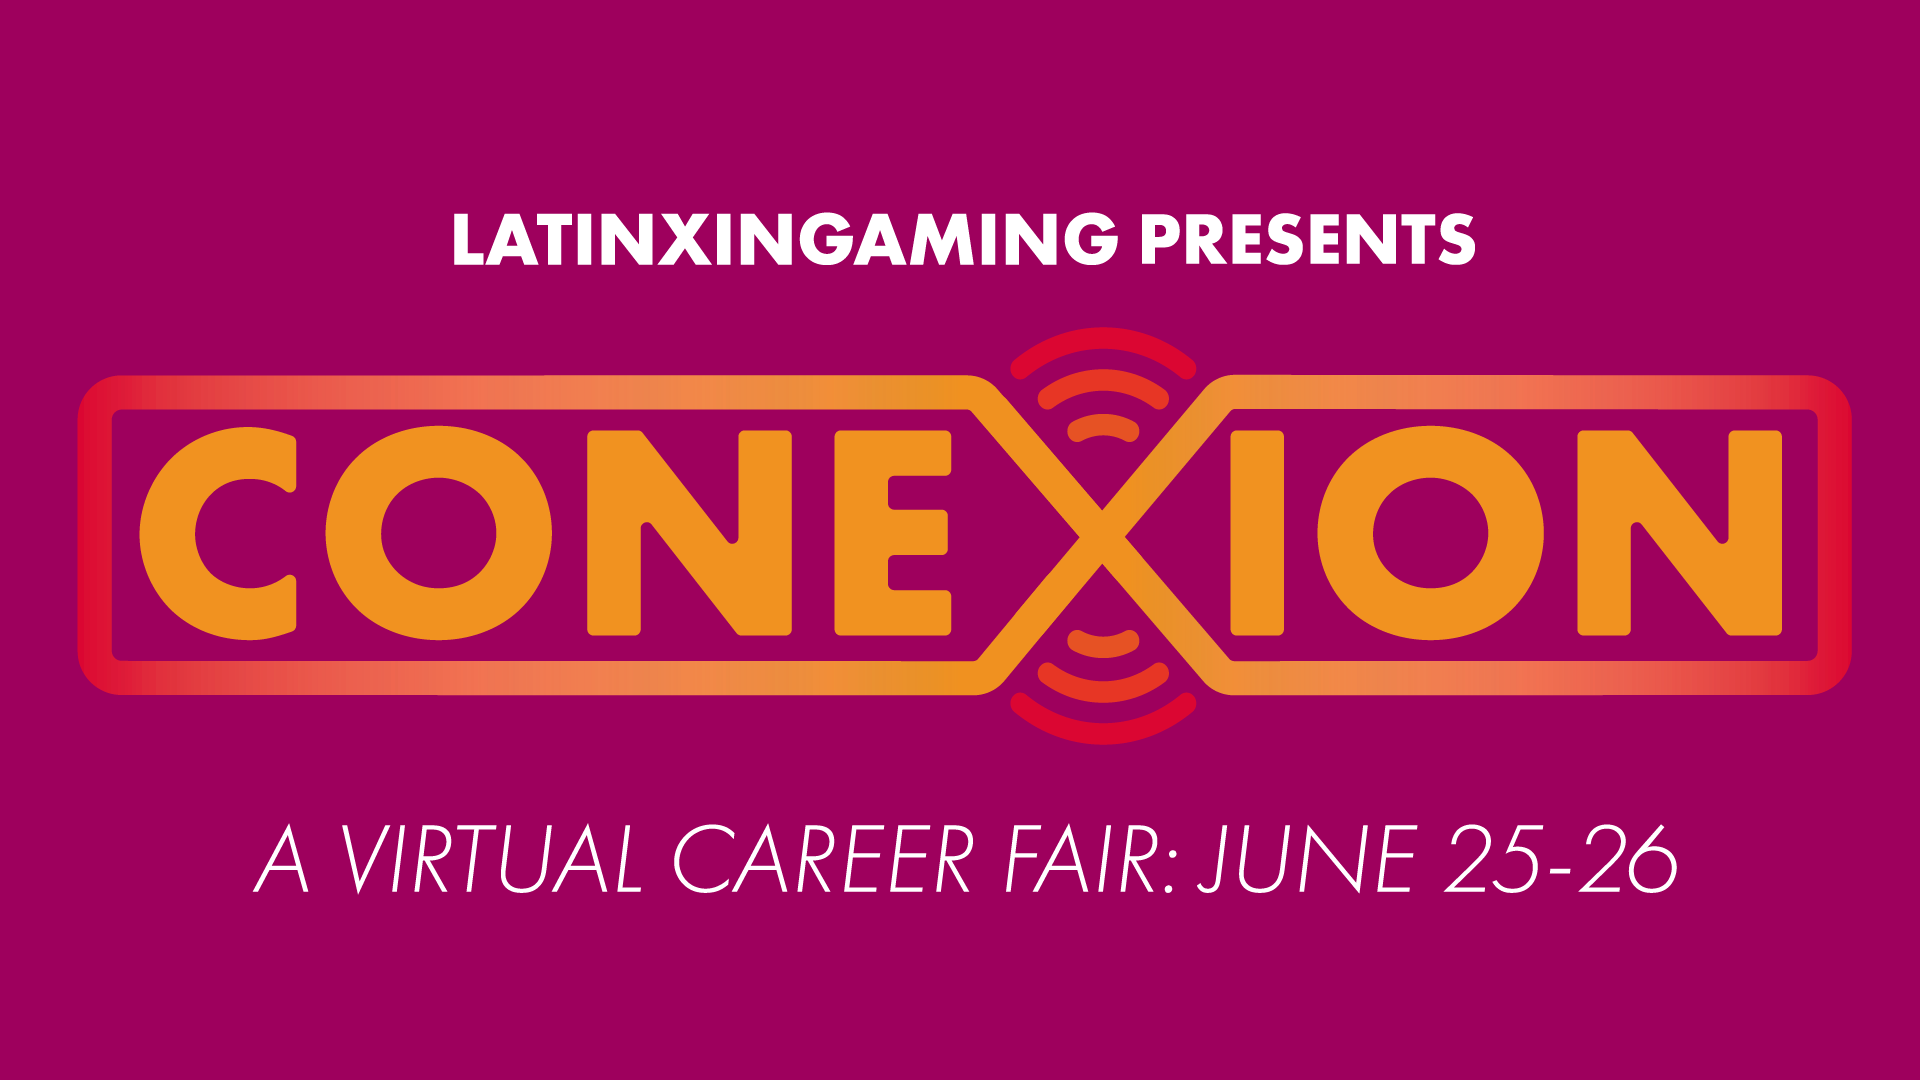 Latinx in Gaming on Twitter: "ANNOUNCING: CONEXION, a virtual career fair  helping match top Latinx candidates with amazing companies, being held on  June 25th & 26th, 2021. The fair will provide industry